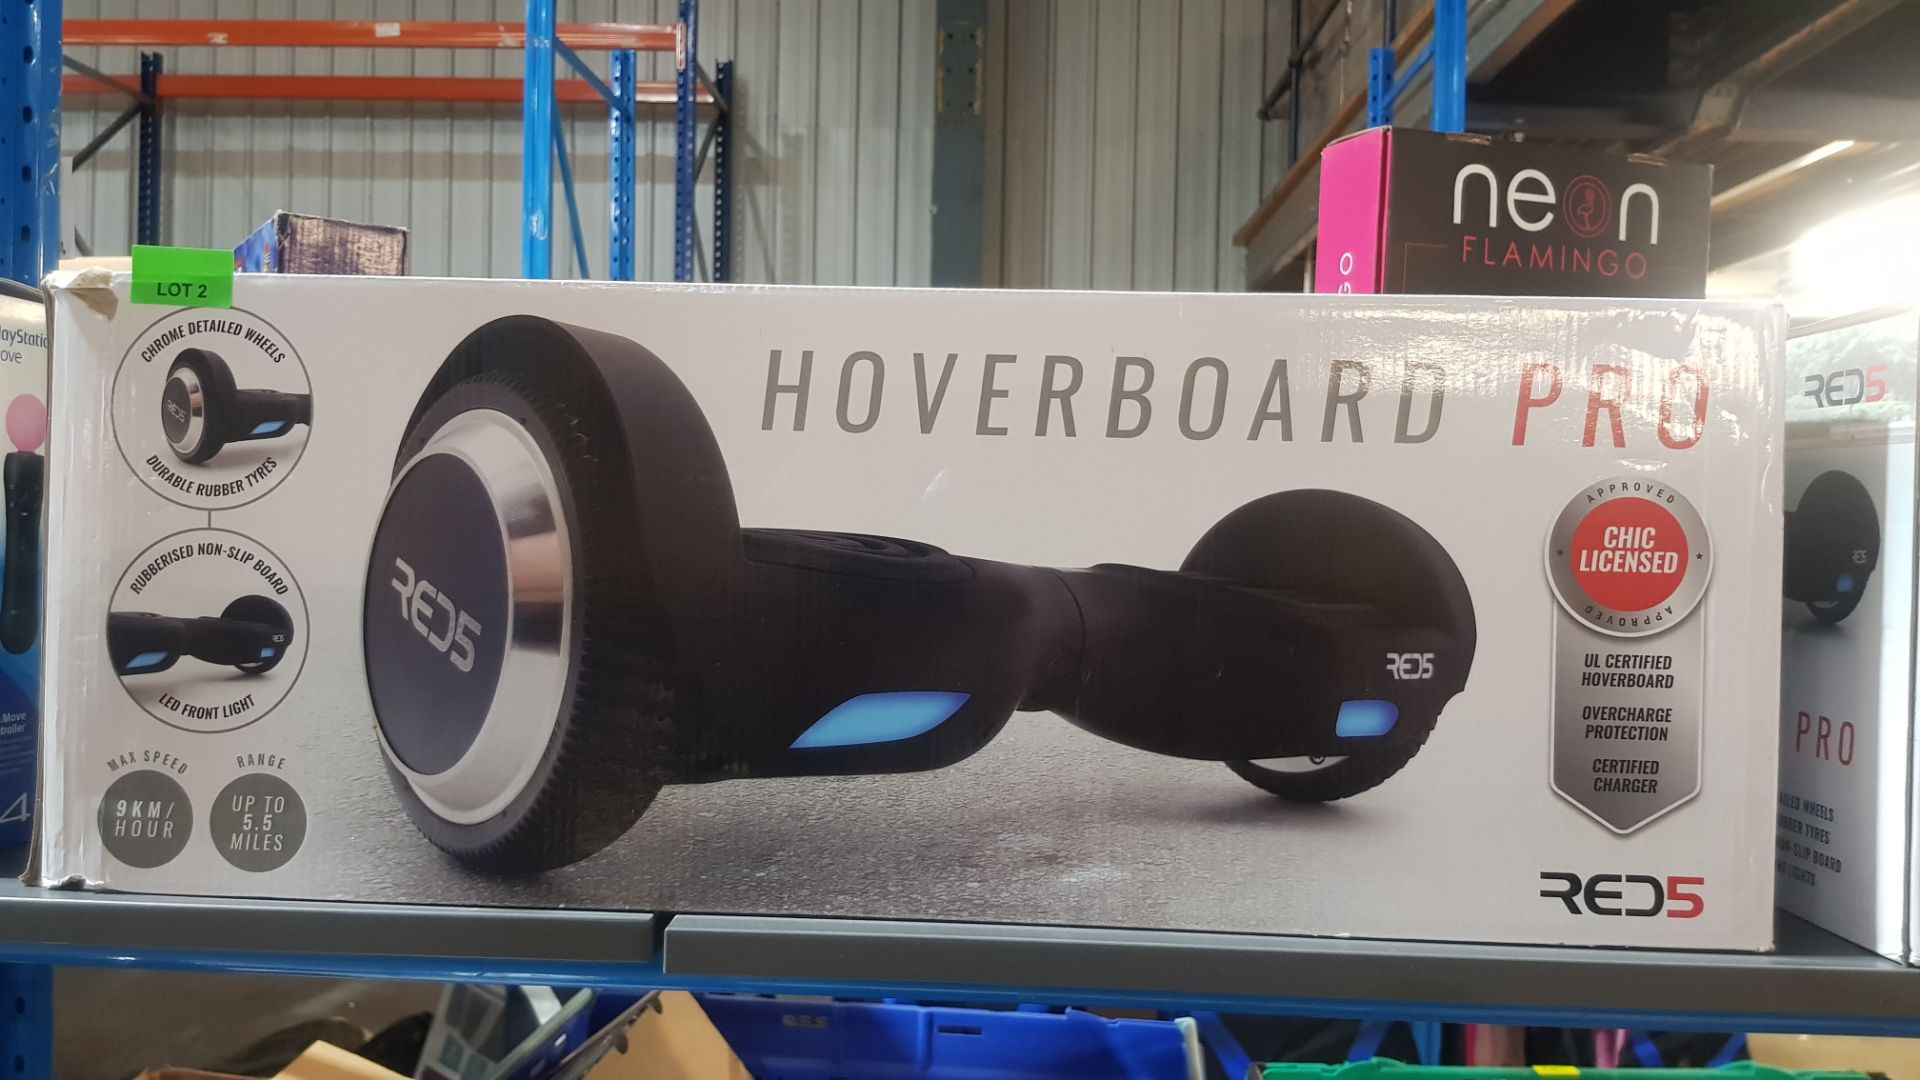 (R6A) Toys / Gadgets. 1 X Red5 Hoverboard Pro. NO POWER CABLE. Tested With Power Cable From Lot 1 - Image 2 of 2